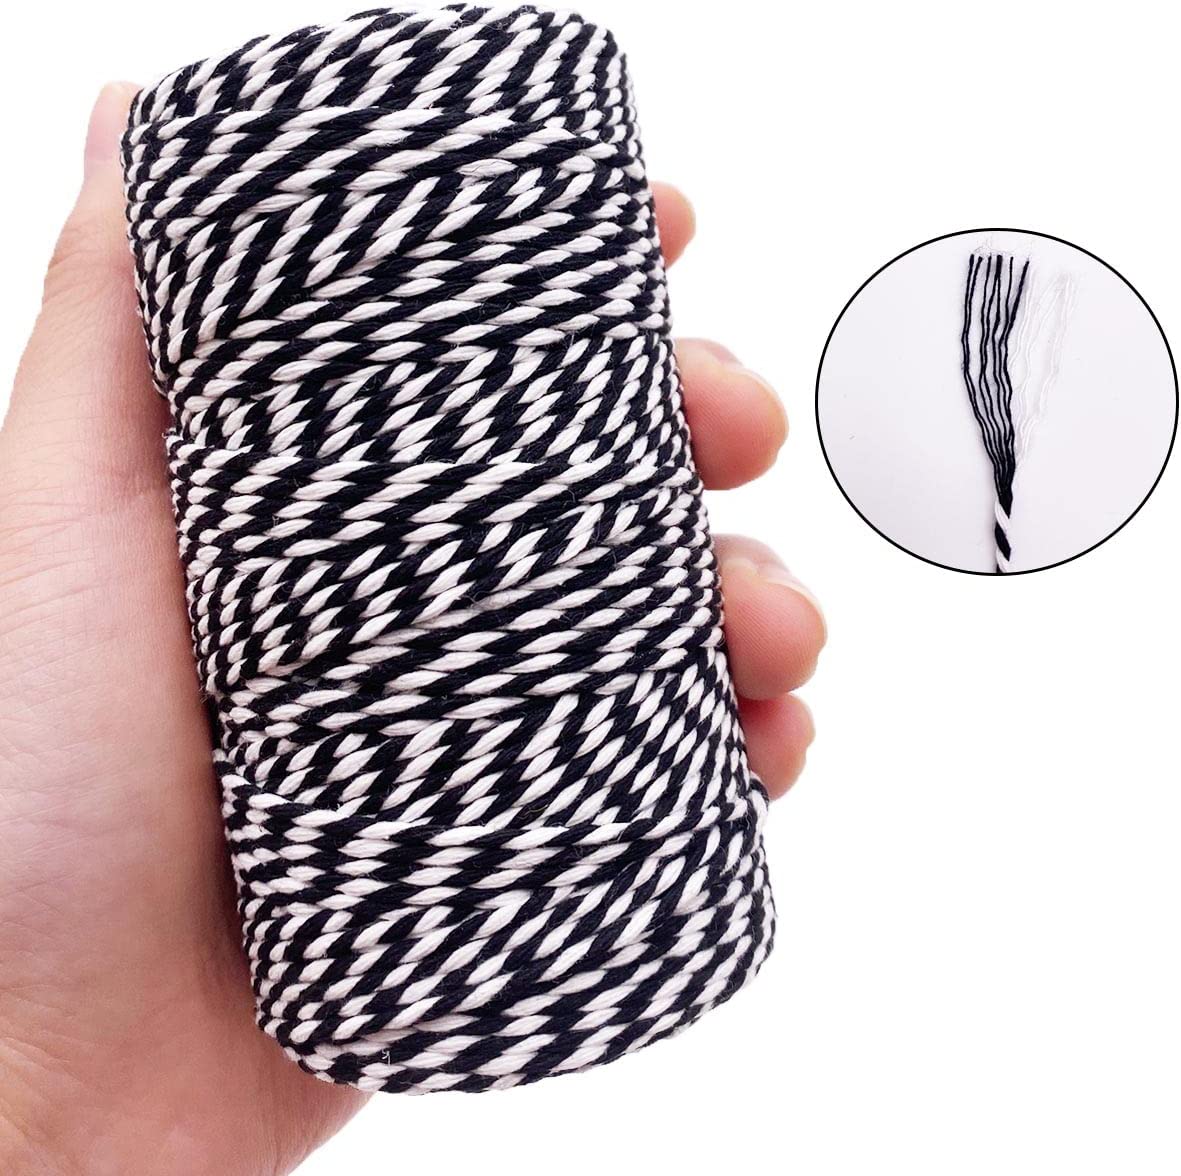  Black White Twine String,328 Feet Cotton Bakers Twine Cotton  Cord DIY Crafts Butchers Twine Strings Wedding Decor Supply Christmas  Wrapping String Rope